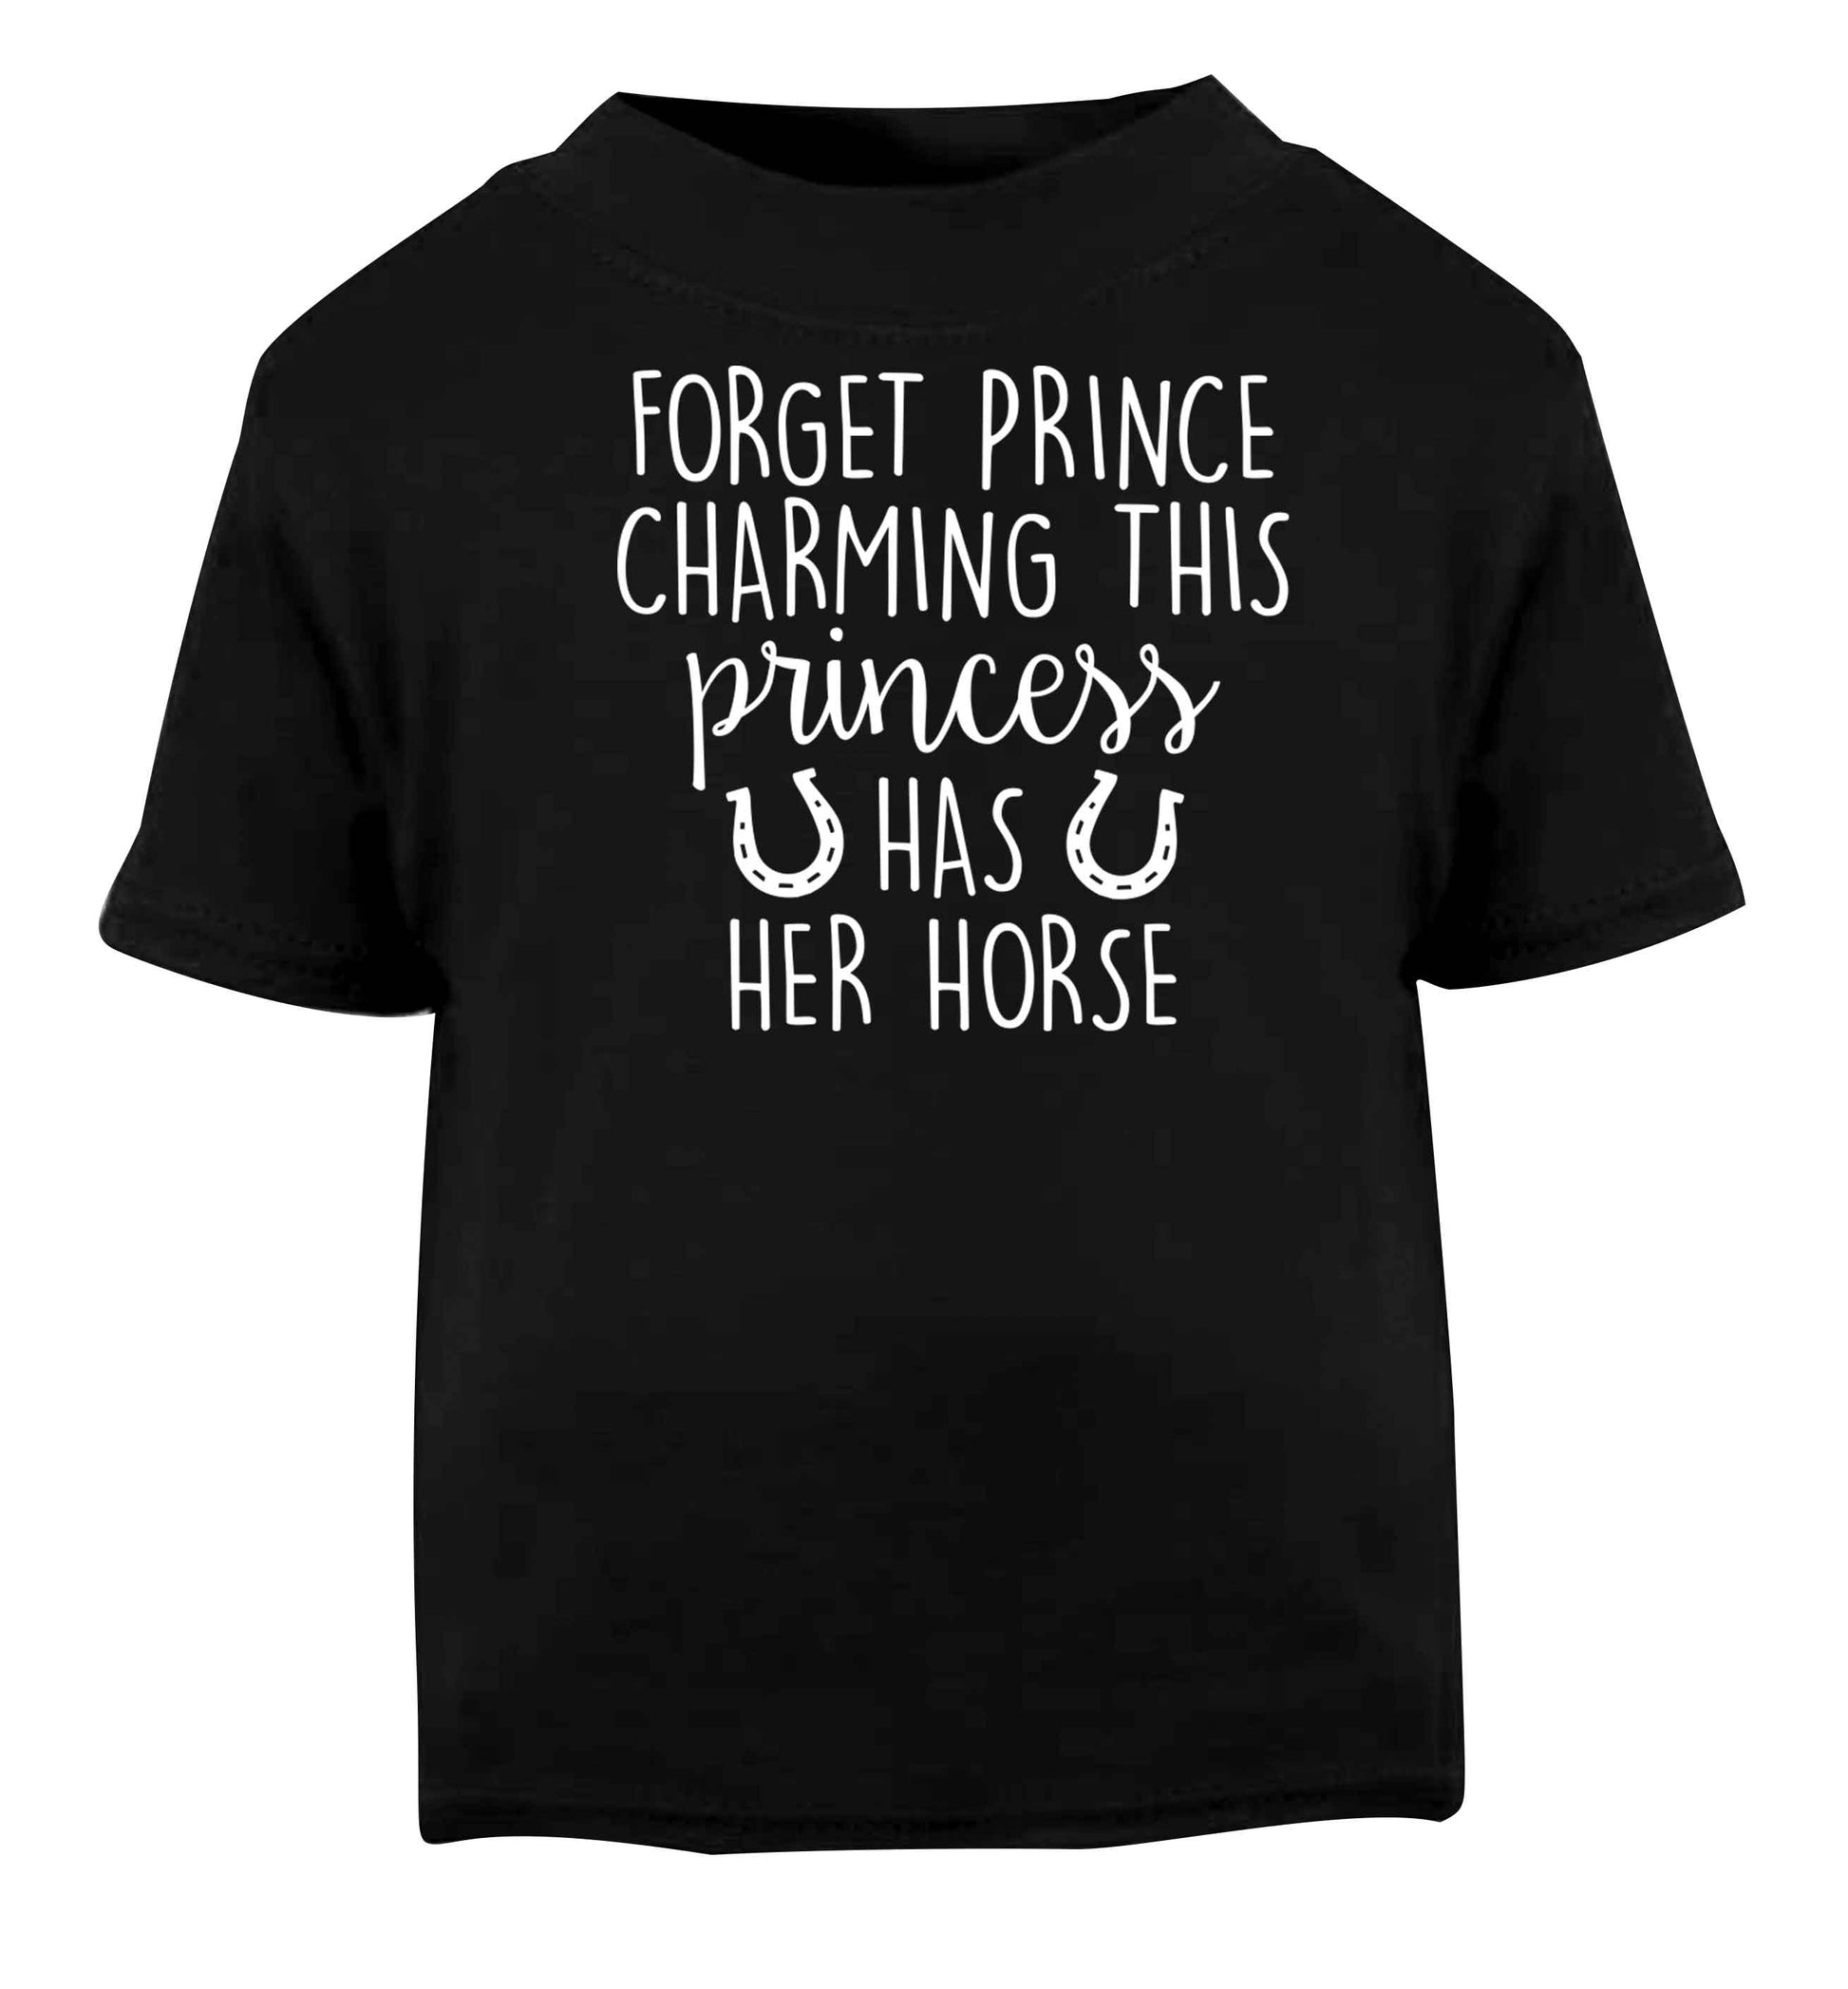 Forget prince charming this princess has her horse Black baby toddler Tshirt 2 years